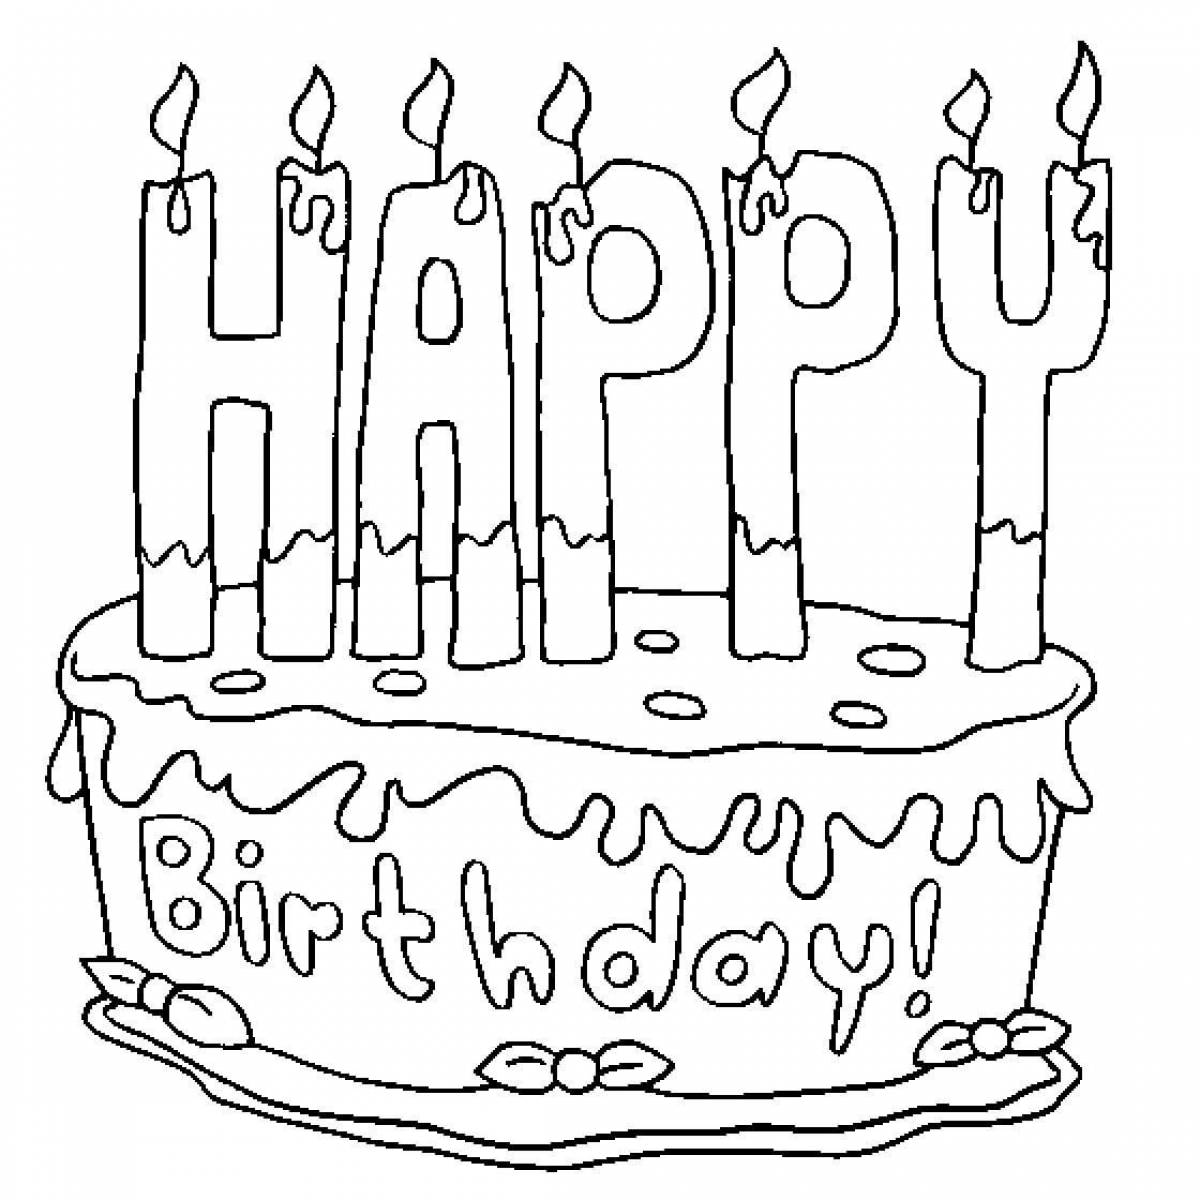 Fabulous birthday coloring page